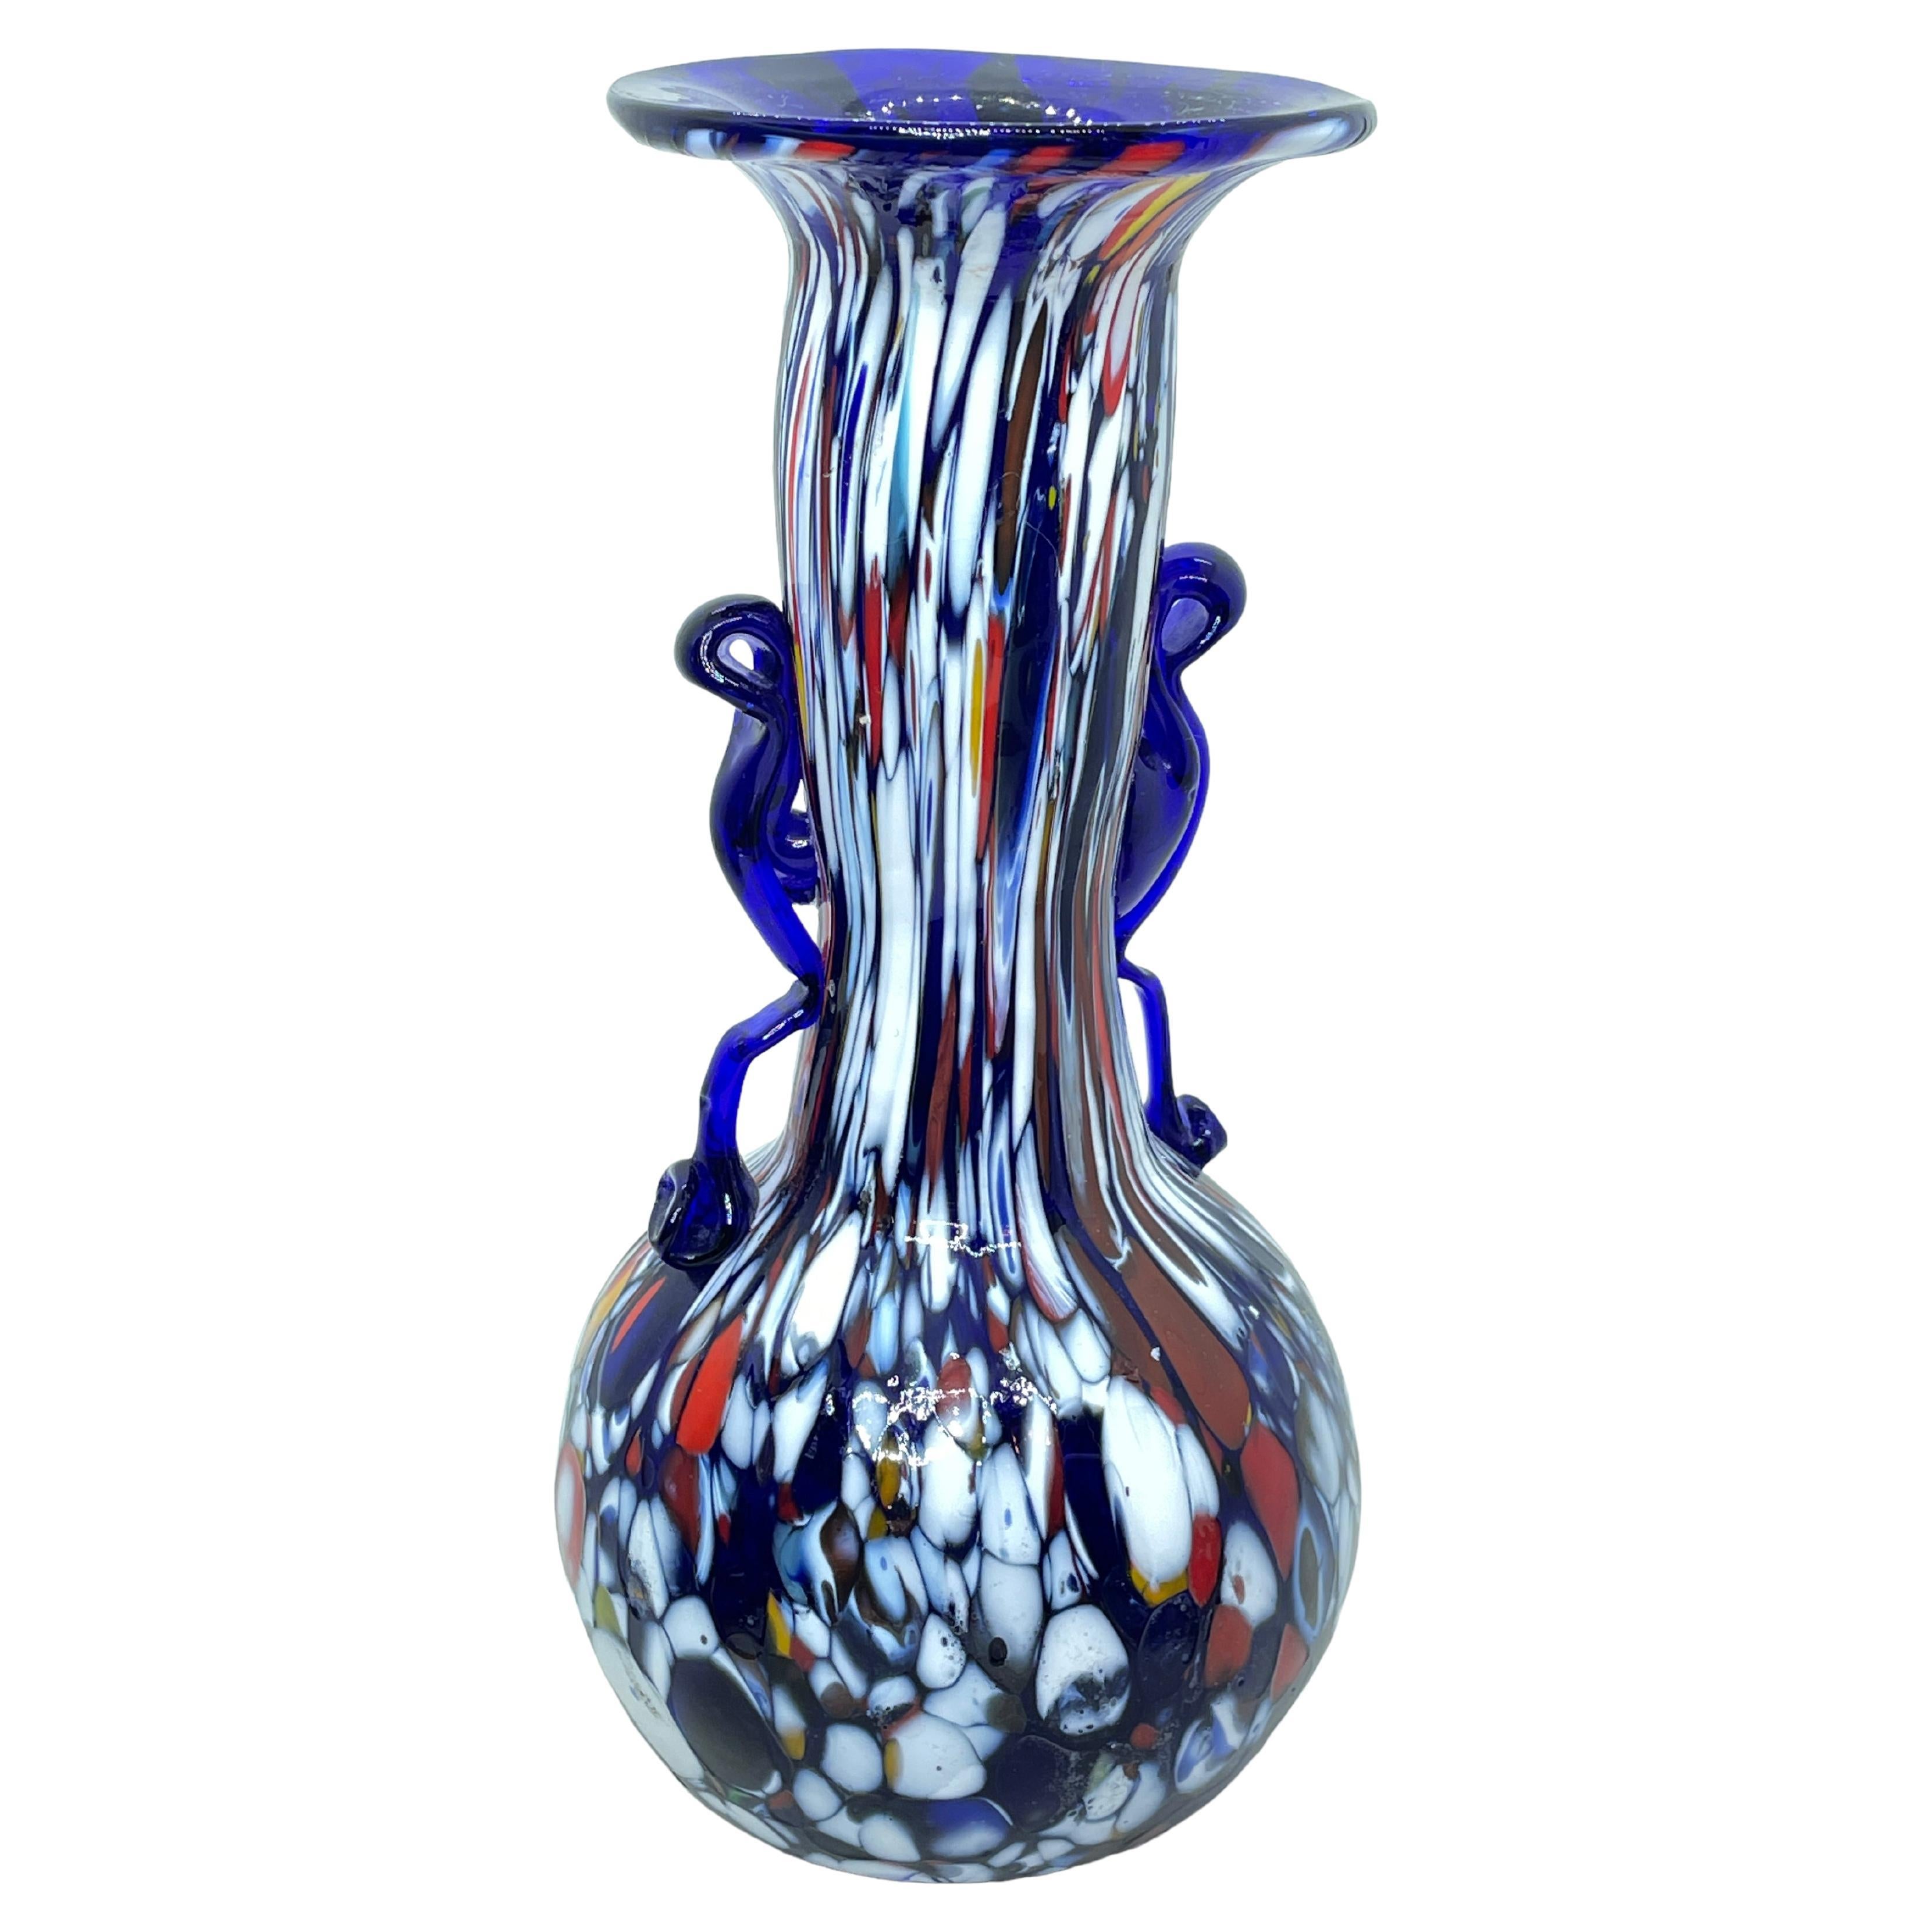 Fratelli Toso Murano Art Glass Neoclassical Urn Bud Vase, Italy, 1960s For Sale